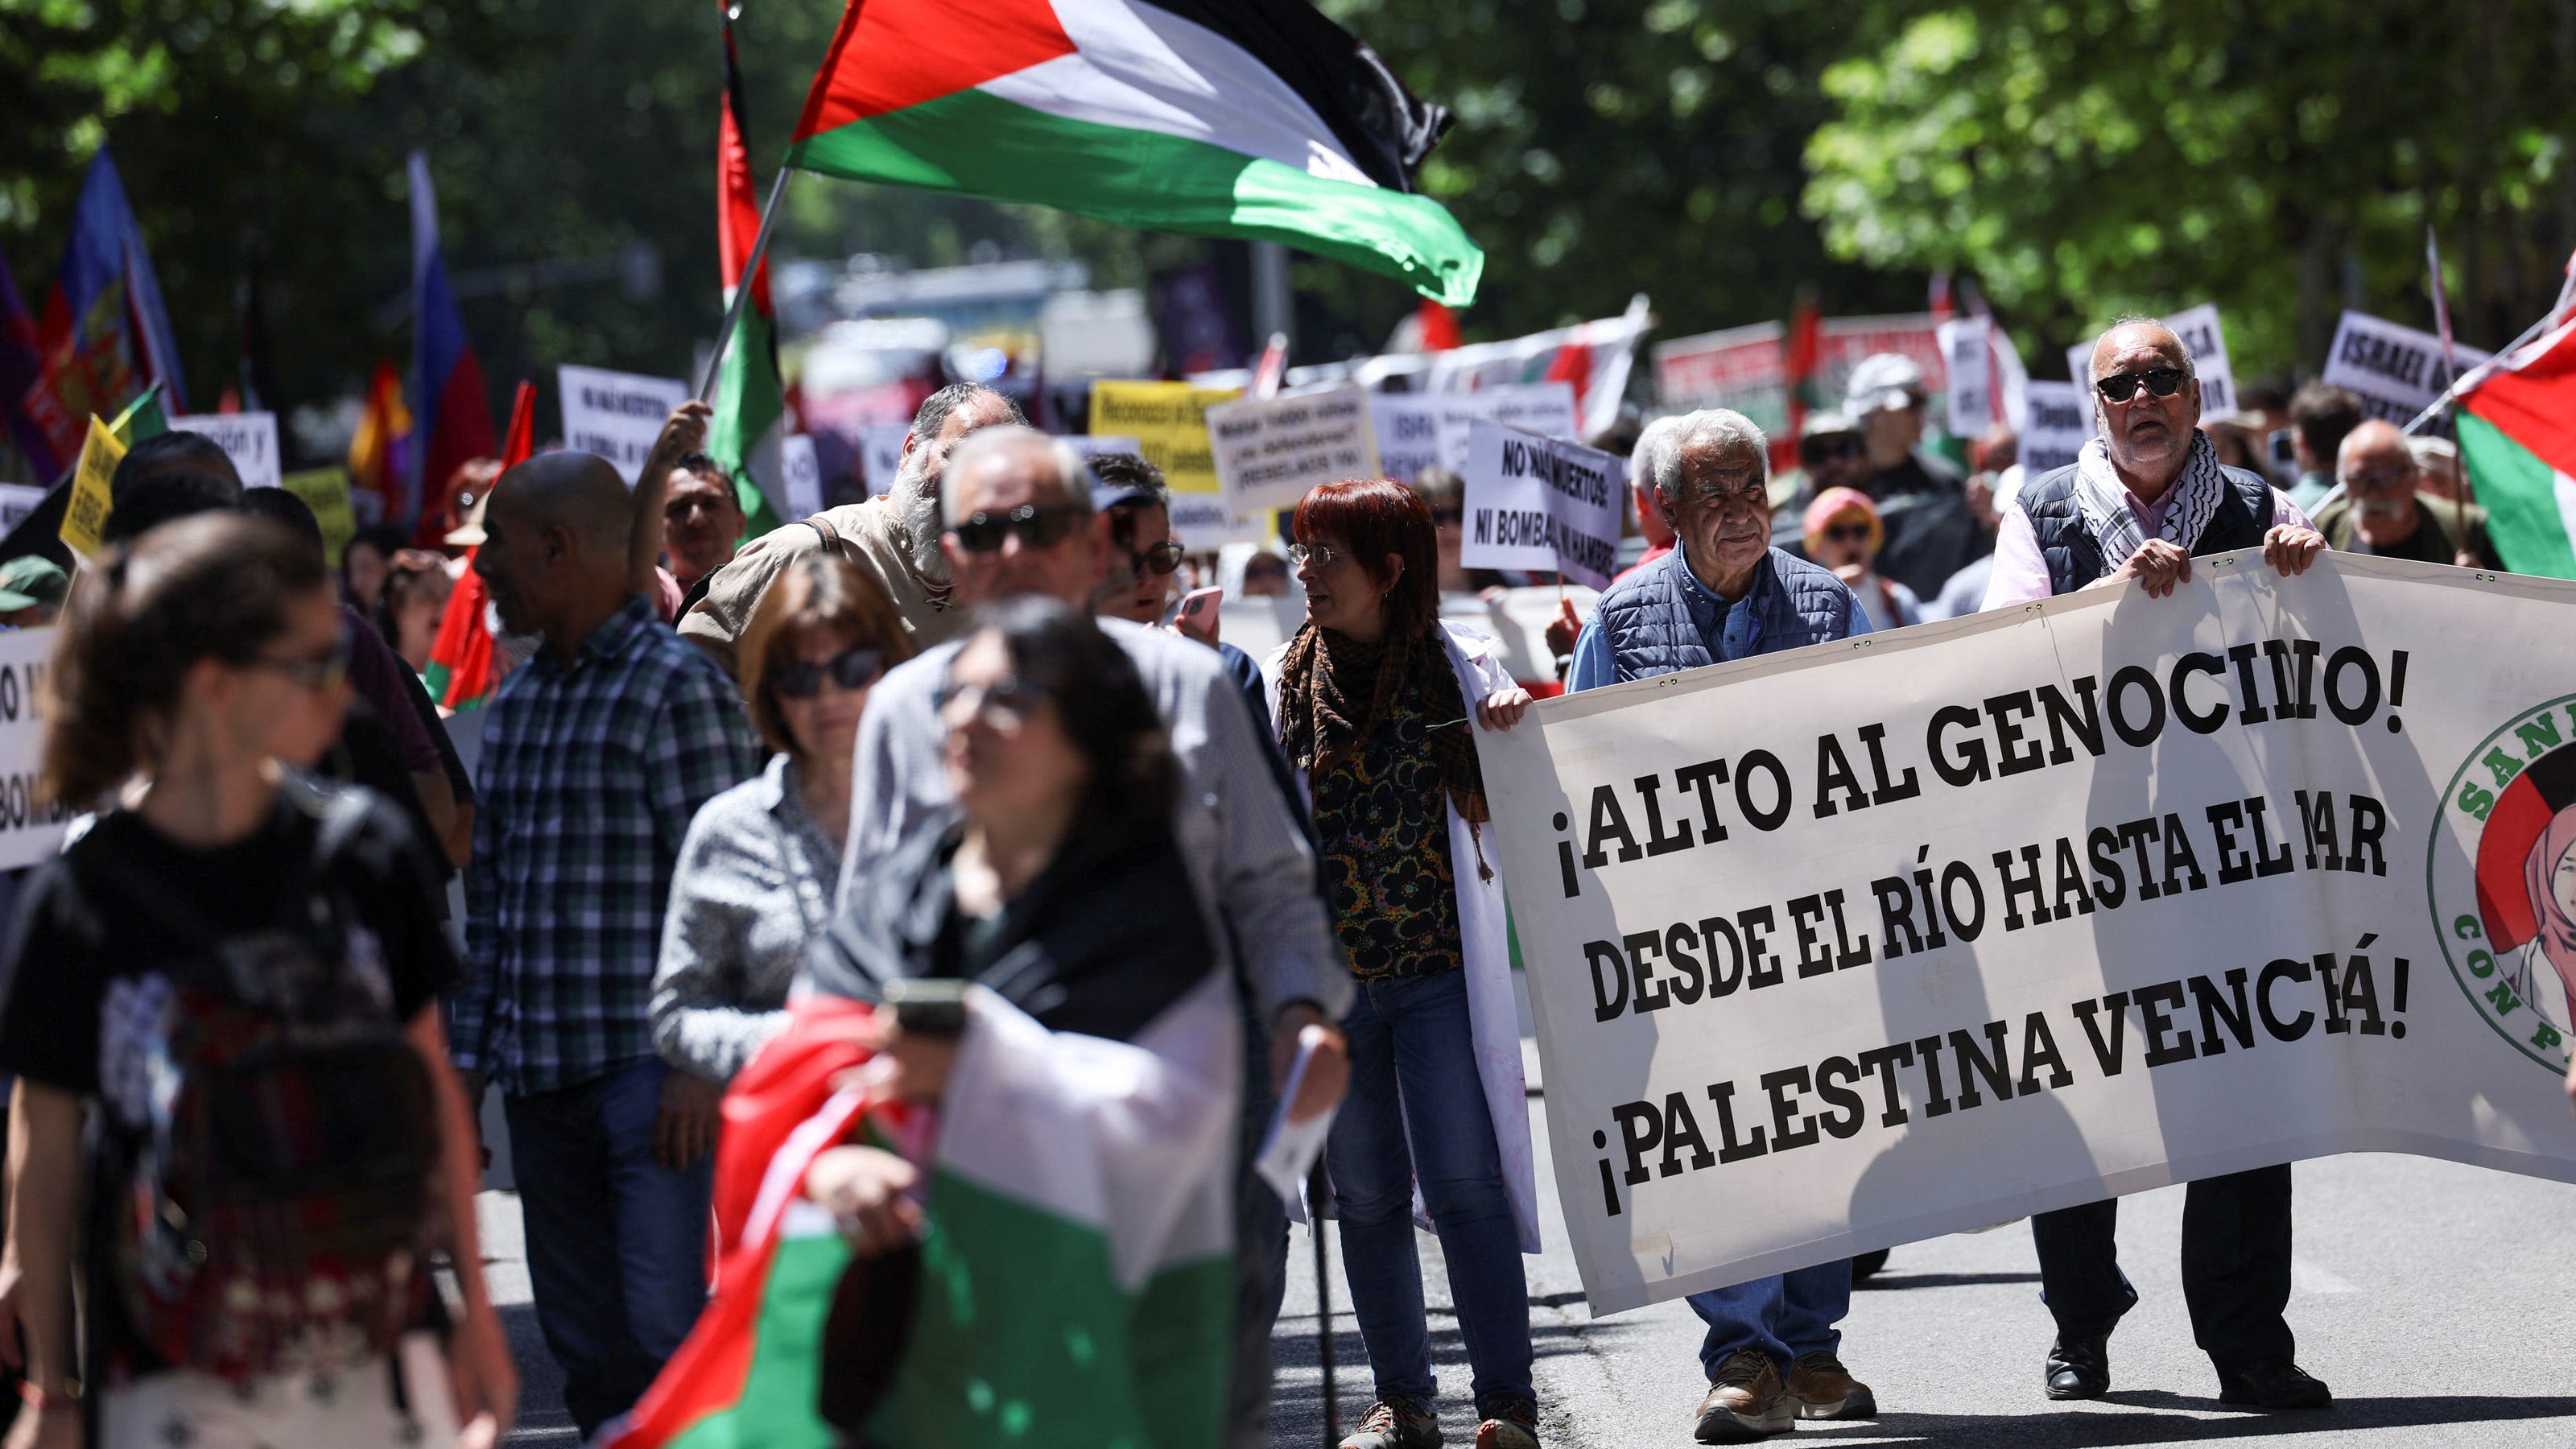 Ireland, Norway and Spain recognize Palestinian state | The Excerpt